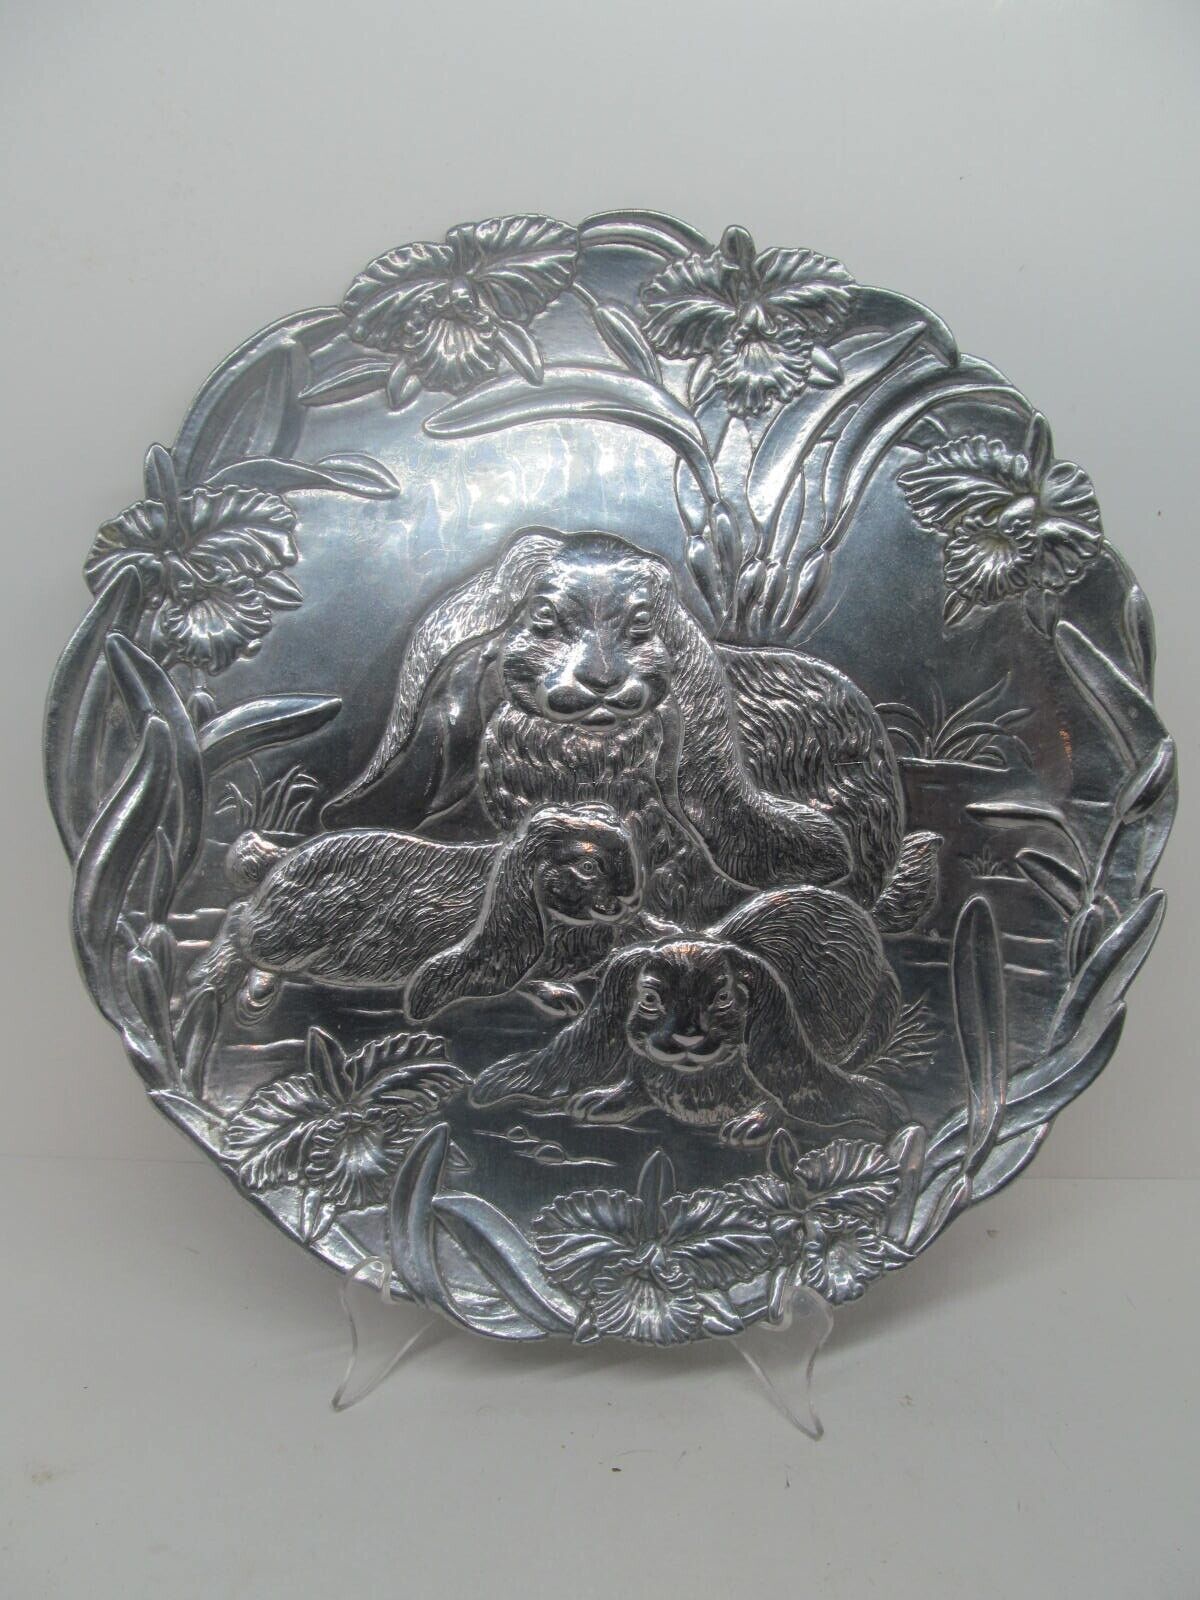 Primary image for Arthur Court 1994 Round 12 1/4" Metal Bunny Rabbits Serving Tray GUC